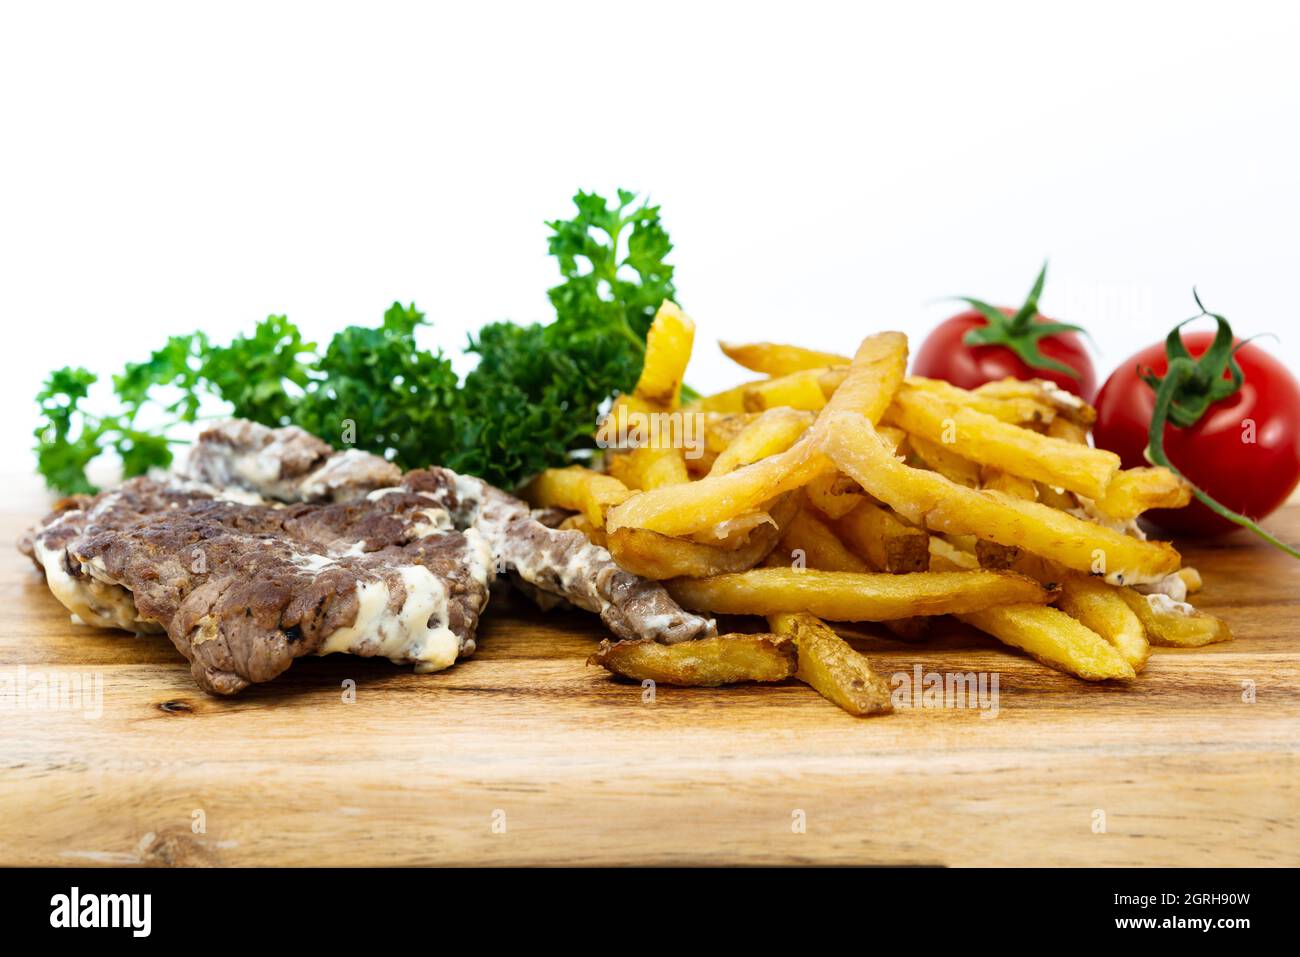 Close-up Of Meat On Cutting Board Against White Background Stock Photo